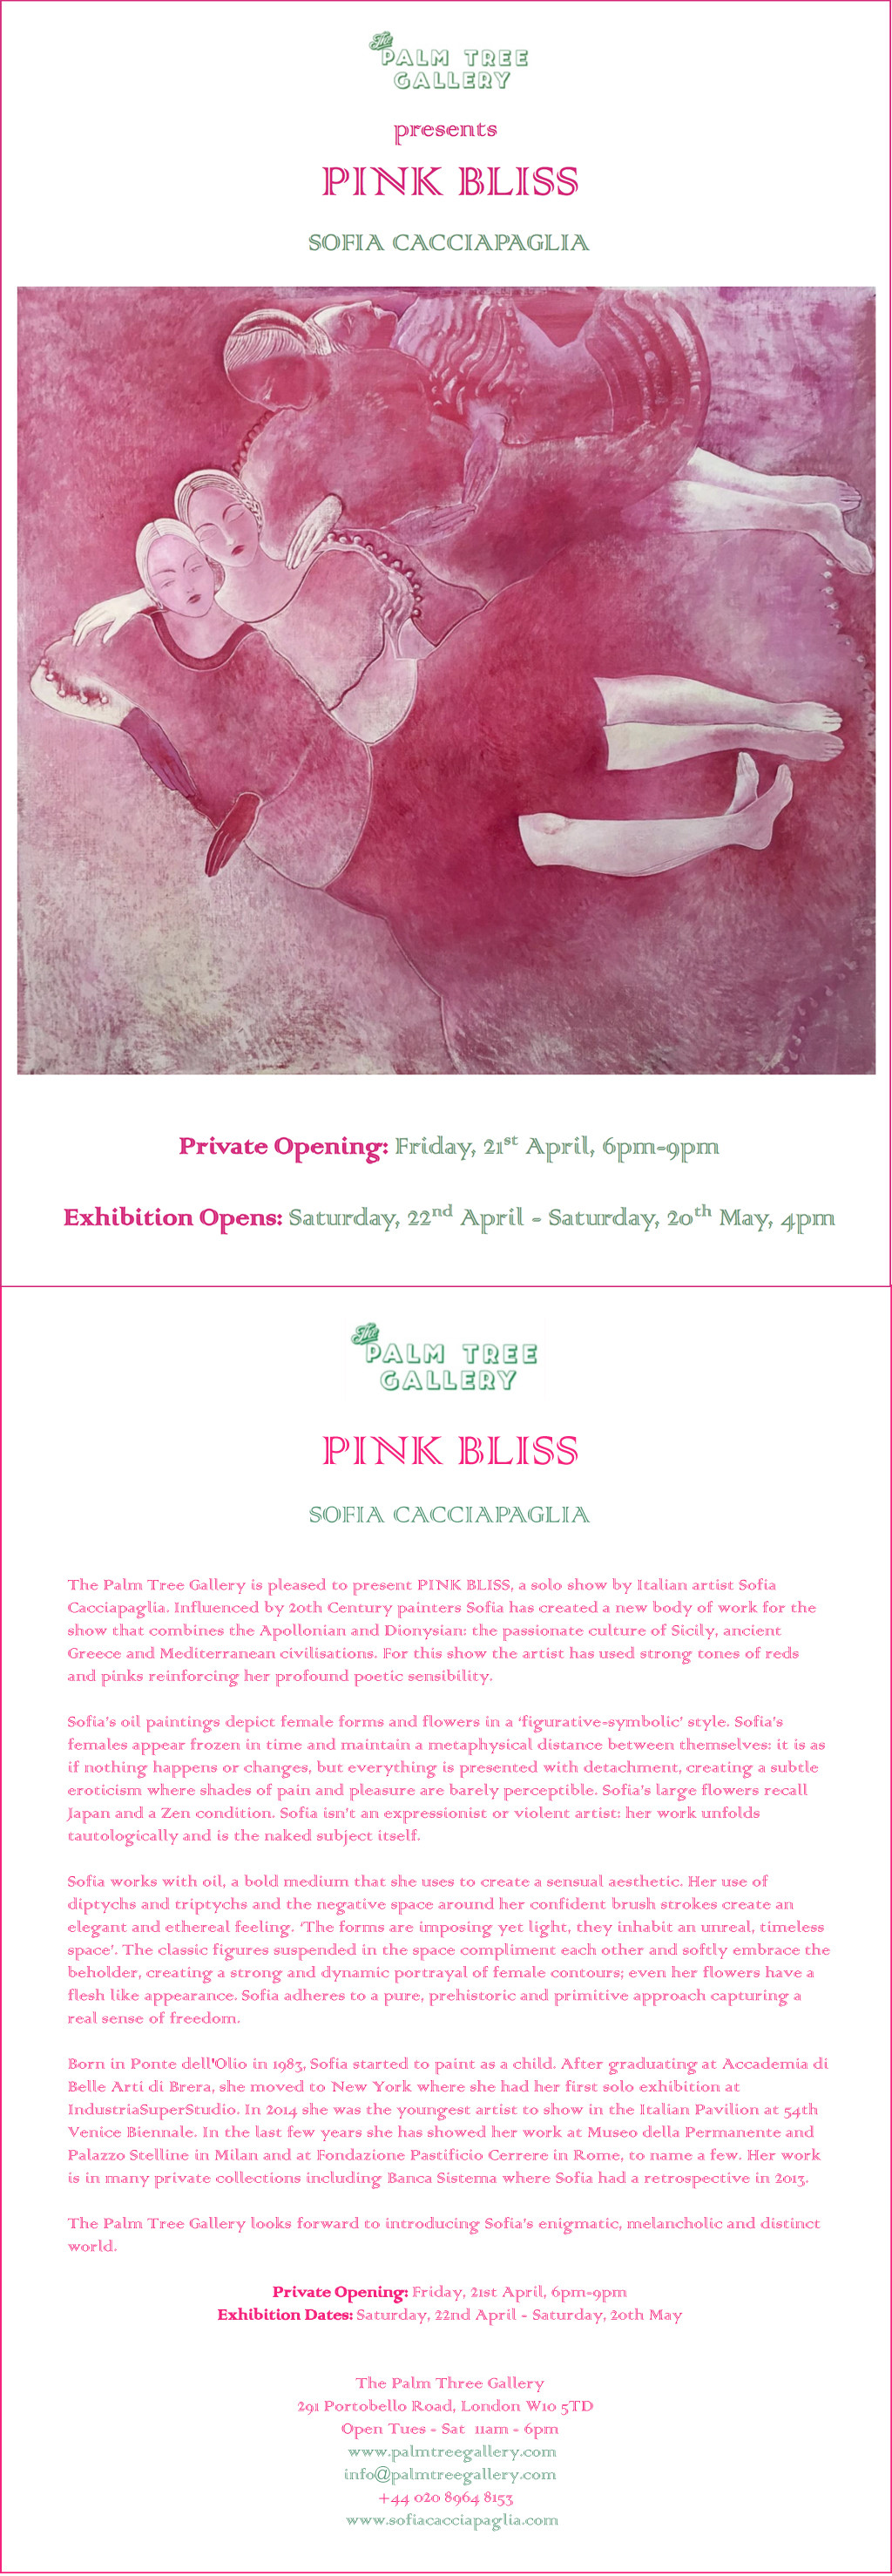 Pink Bliss Press release